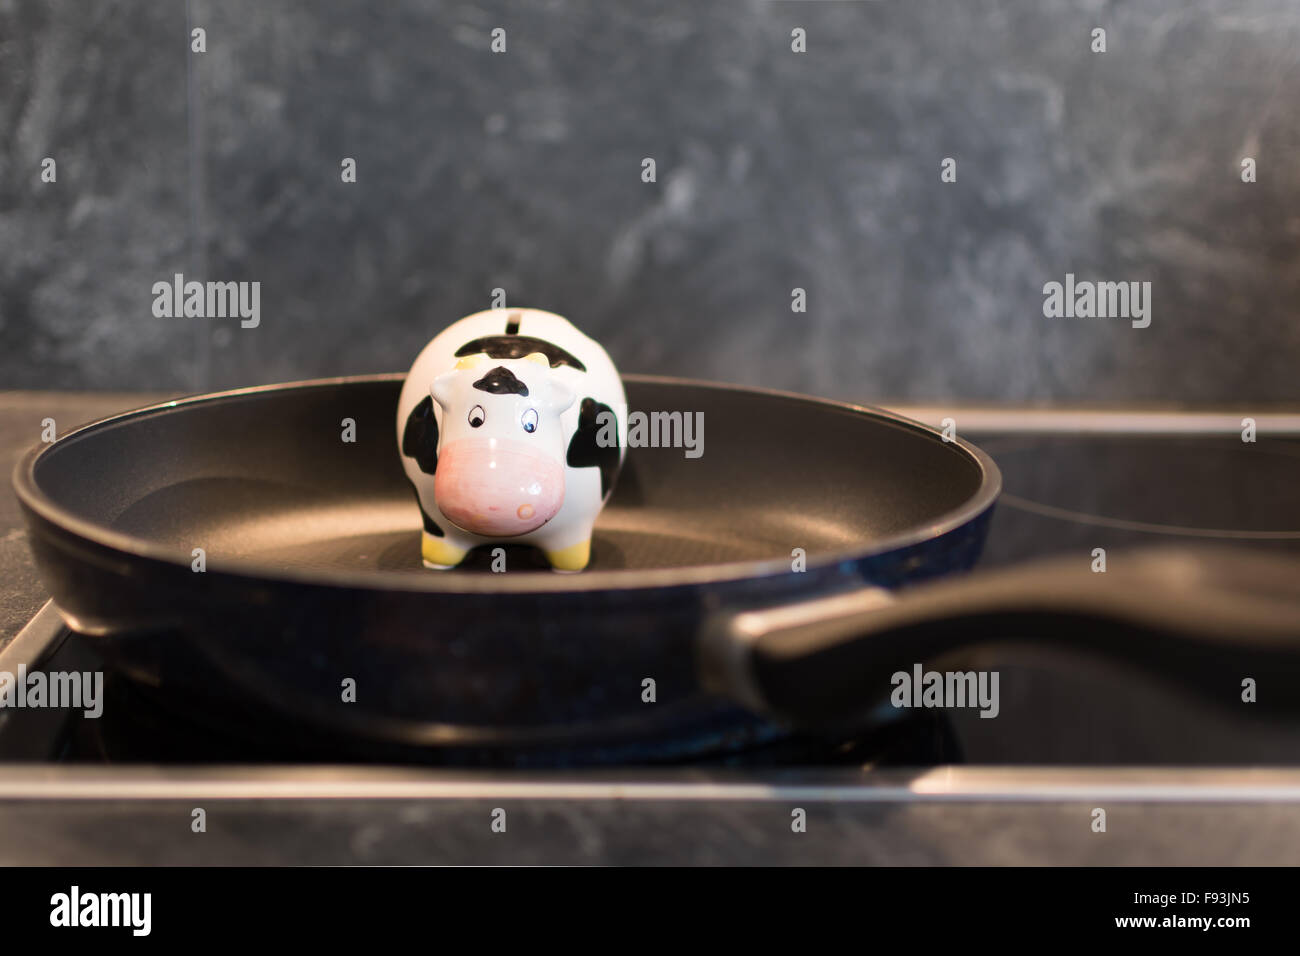 Cow in a pan Stock Photo